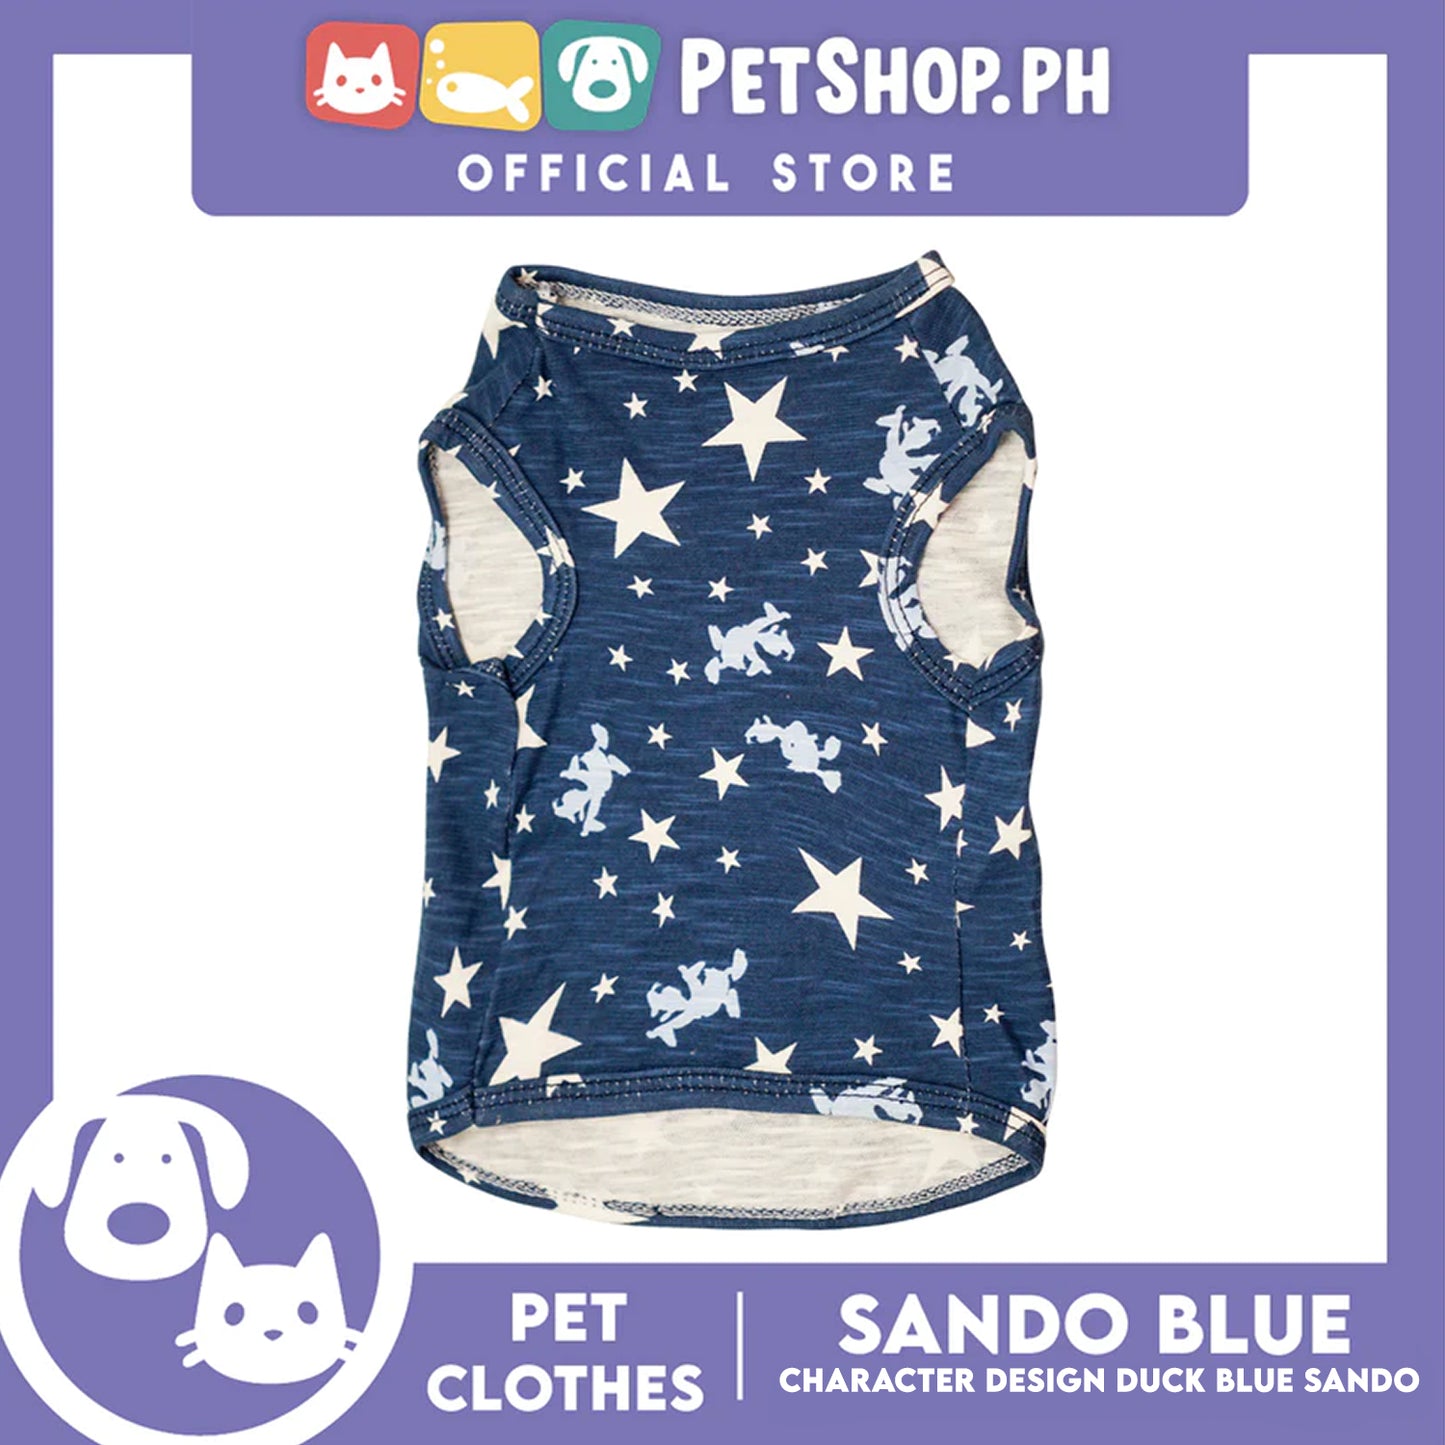 Pet Sando Duck Blue Sando (Small) Pet Shirts Suitable for Dogs and Cats